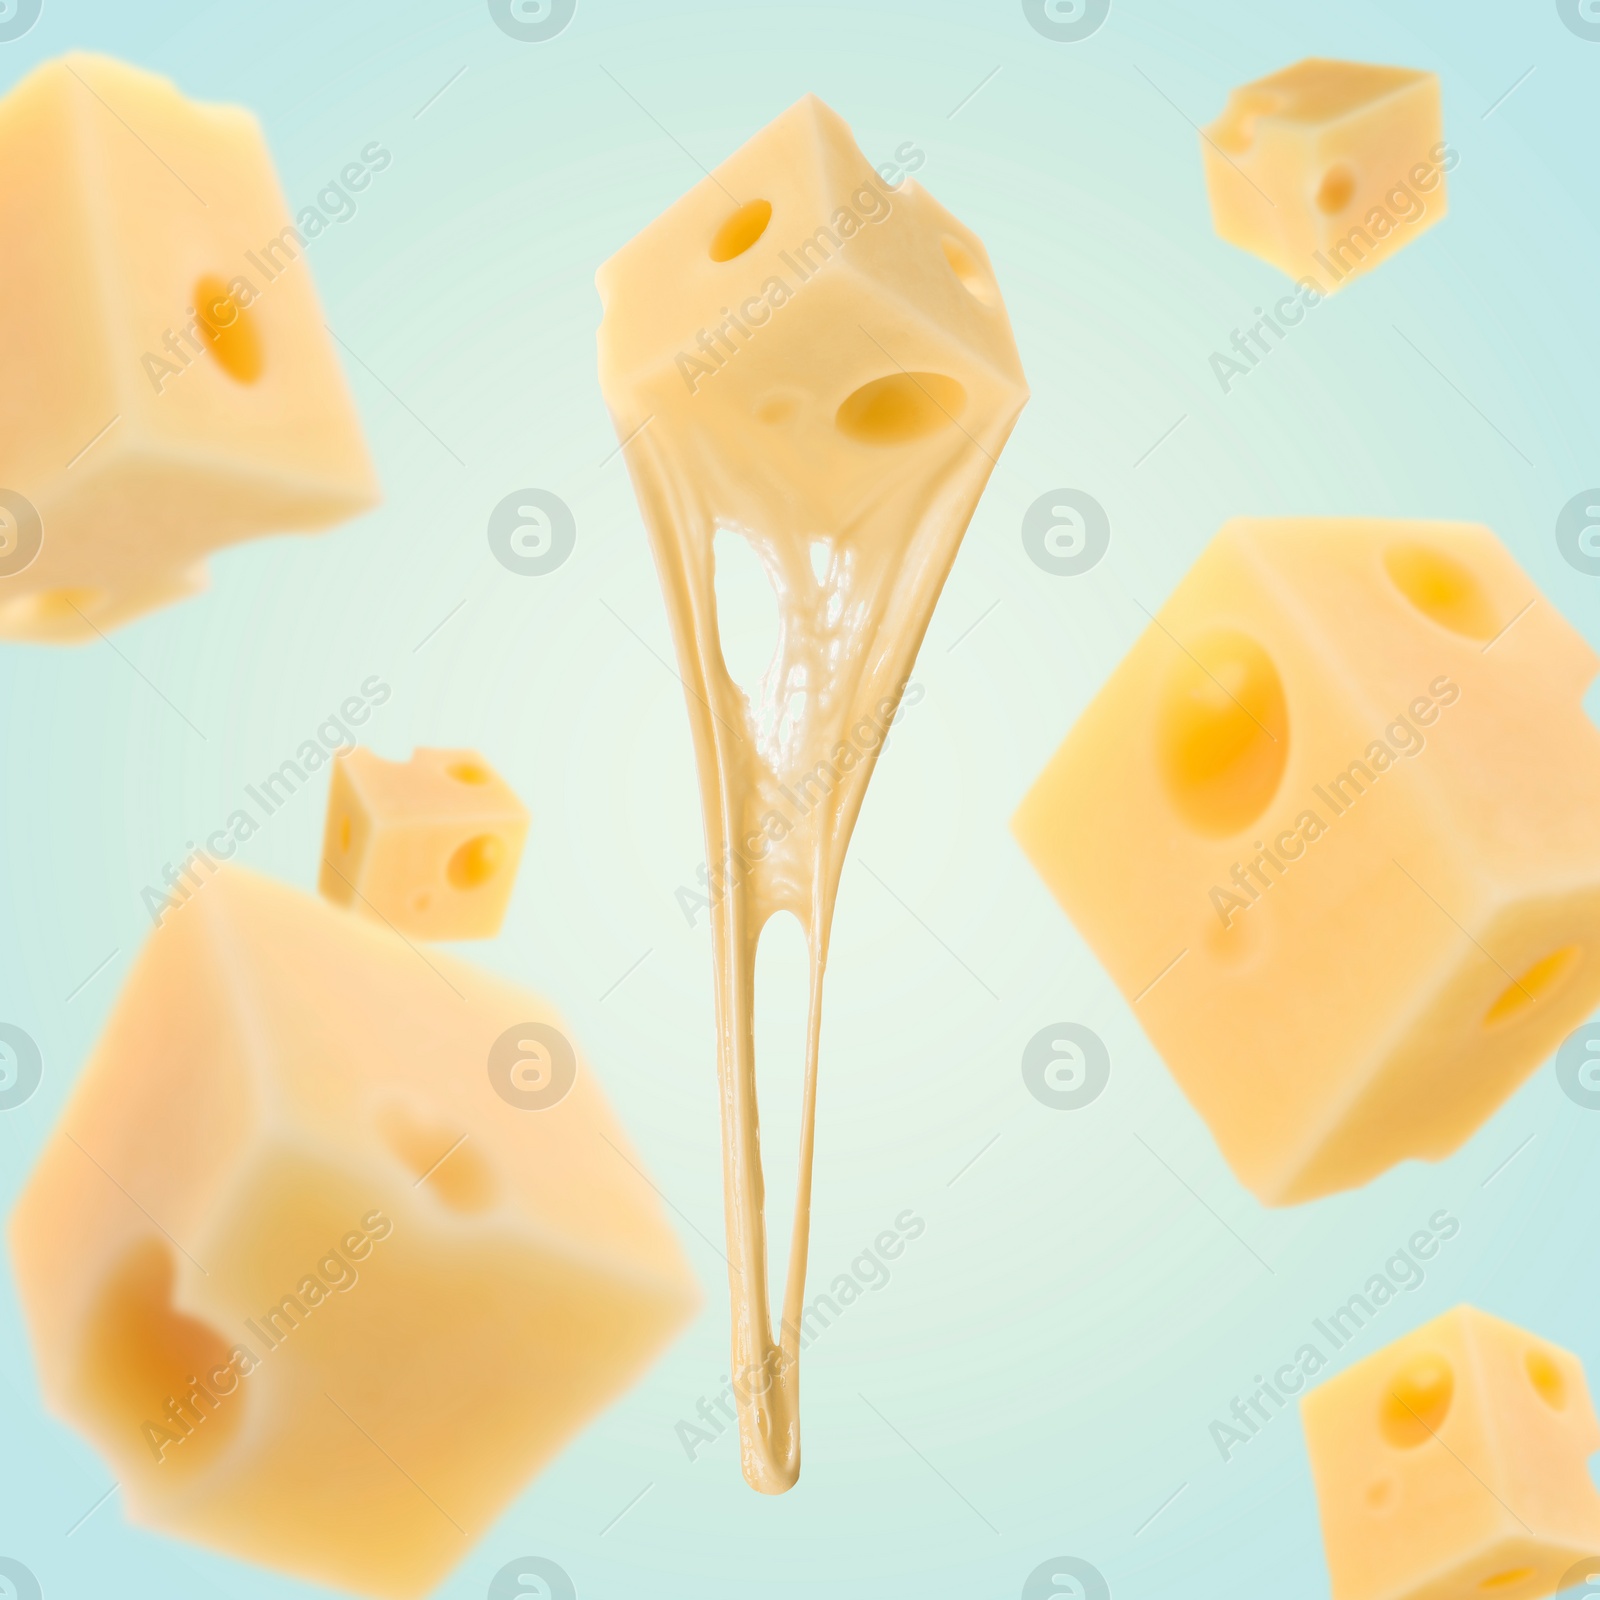 Image of Pieces of cheese falling on light blue background